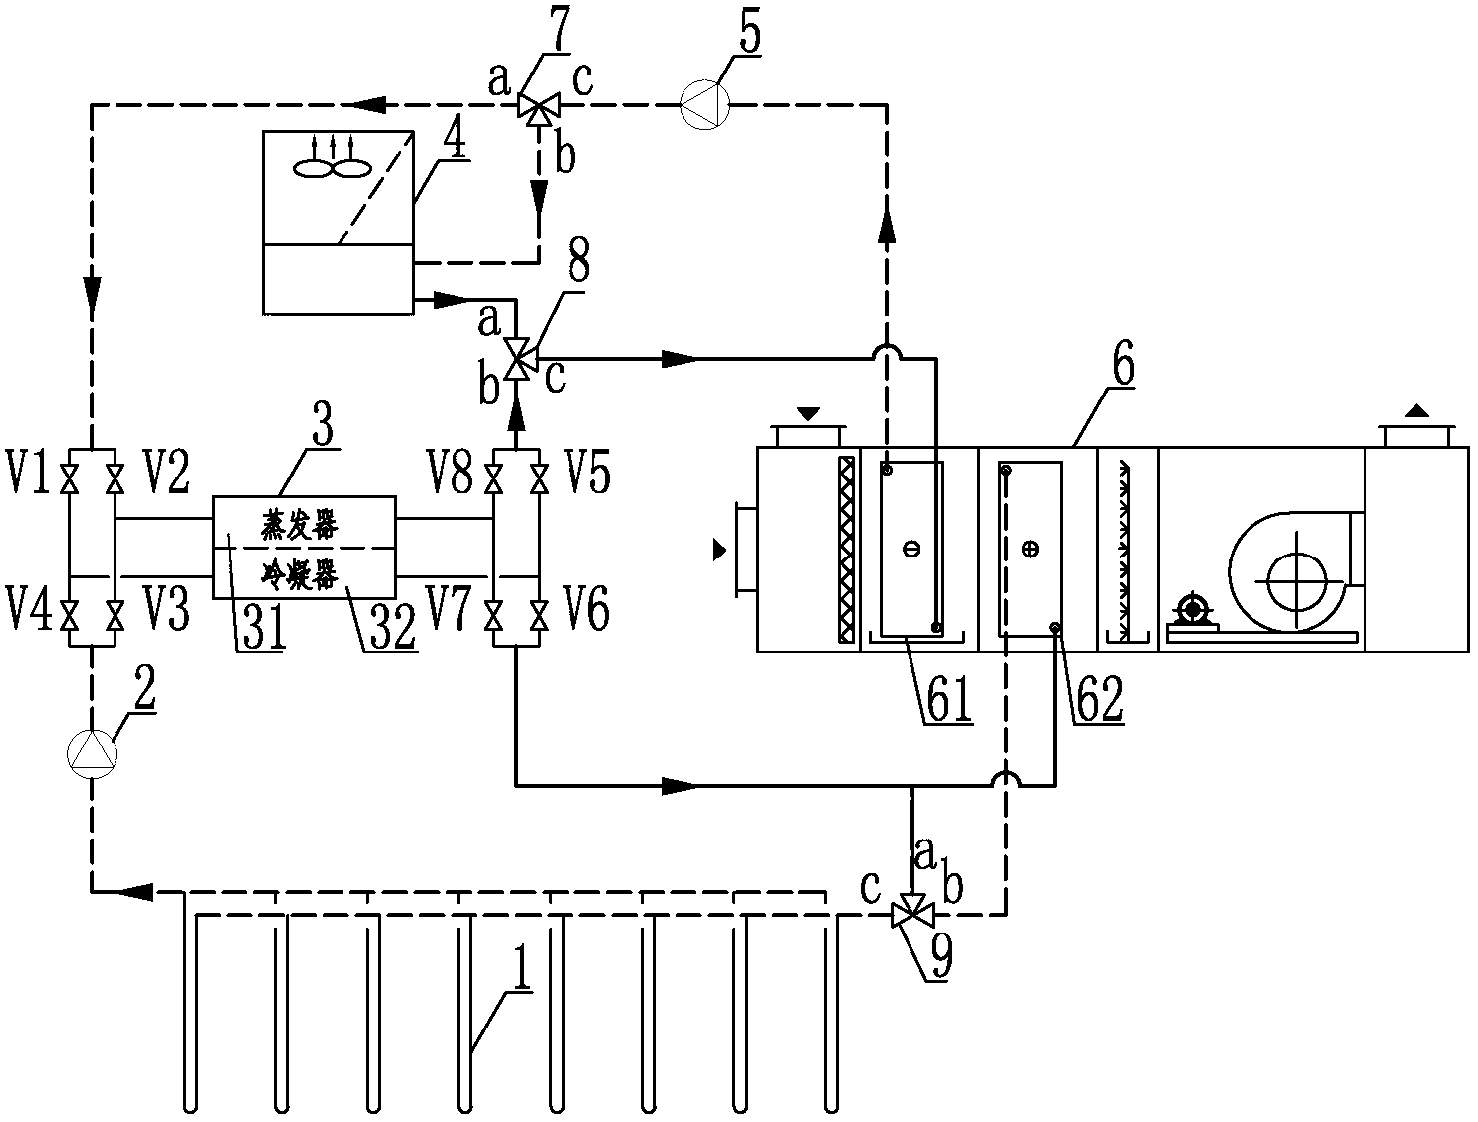 Ground source and air source coupling heat pump system with heat recovery function